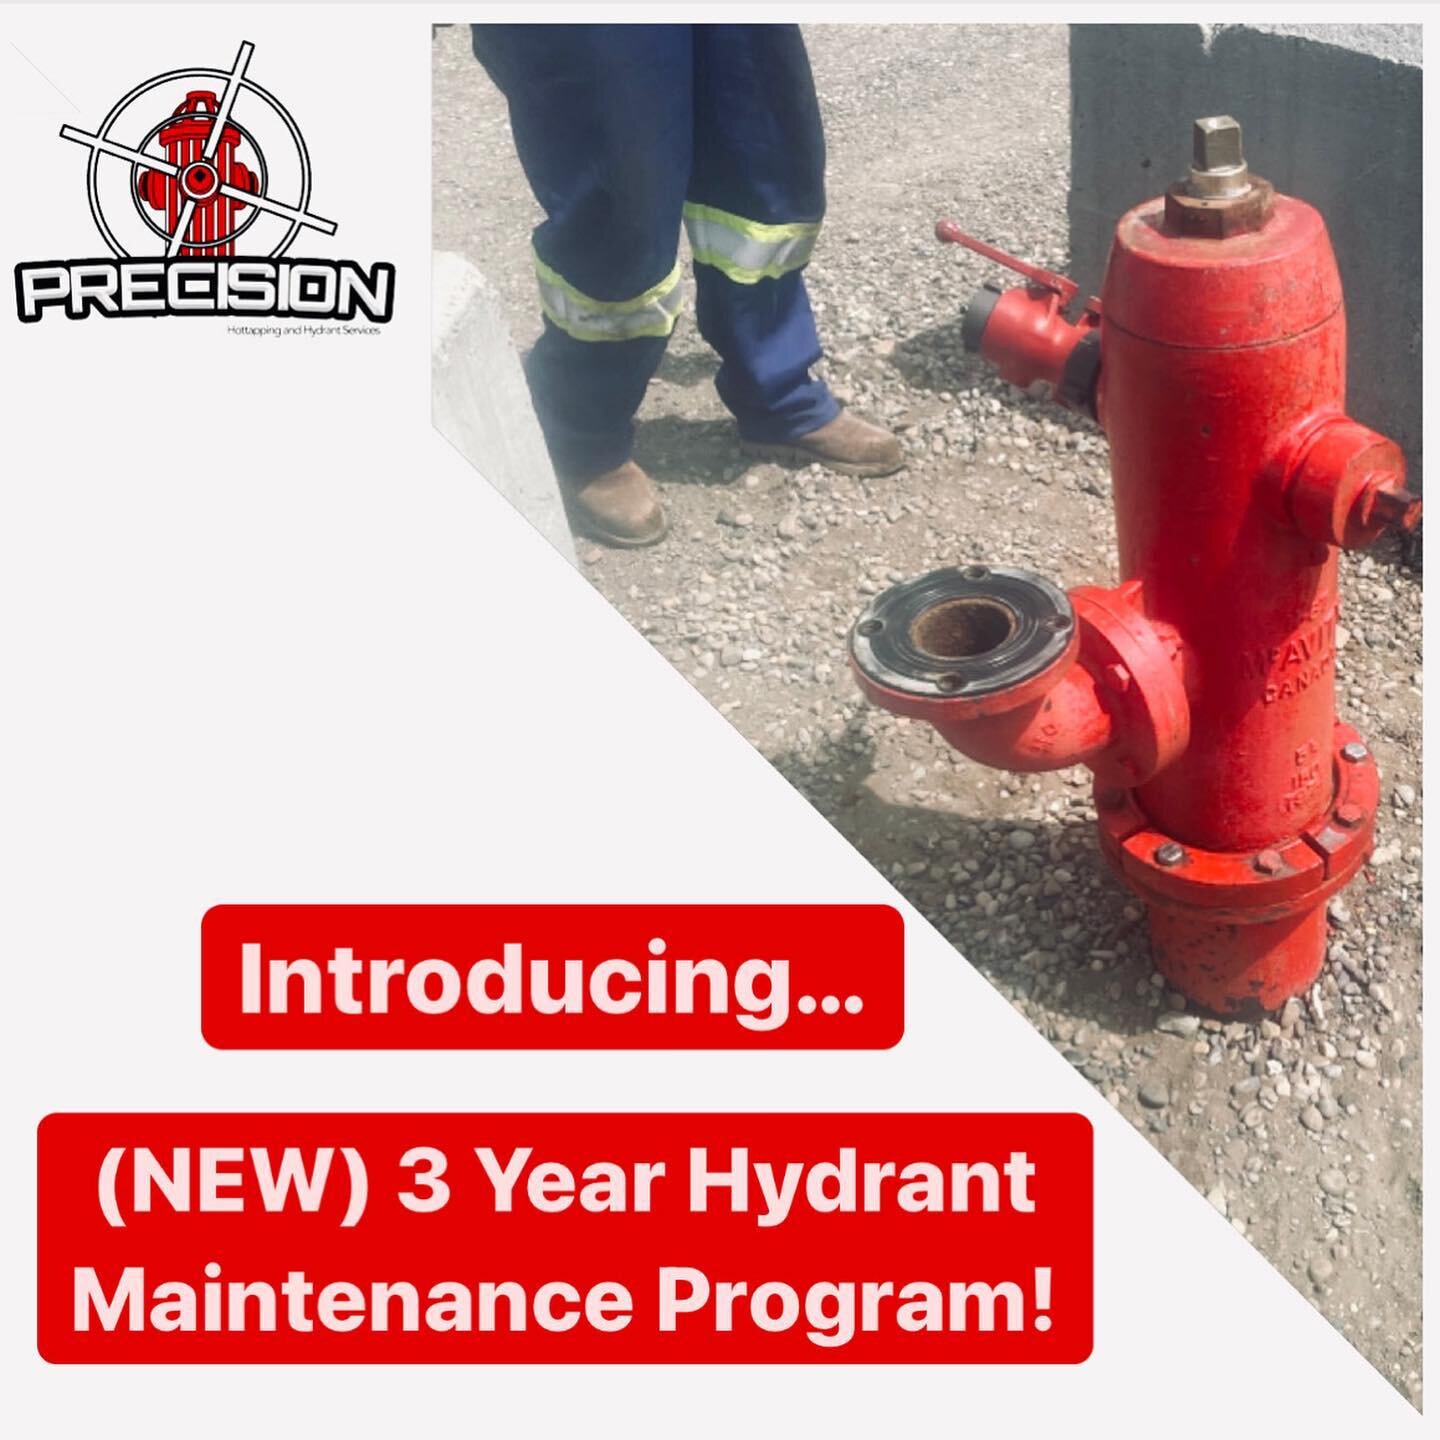 Introducing Precisions new 3 year subscription program. Book yourself on a seasonal schedule and see what we have to offer with our new 3 year peace-of-mind program! Contact or visit our website in the bio to learn more!

#hottapping #plumbing #const